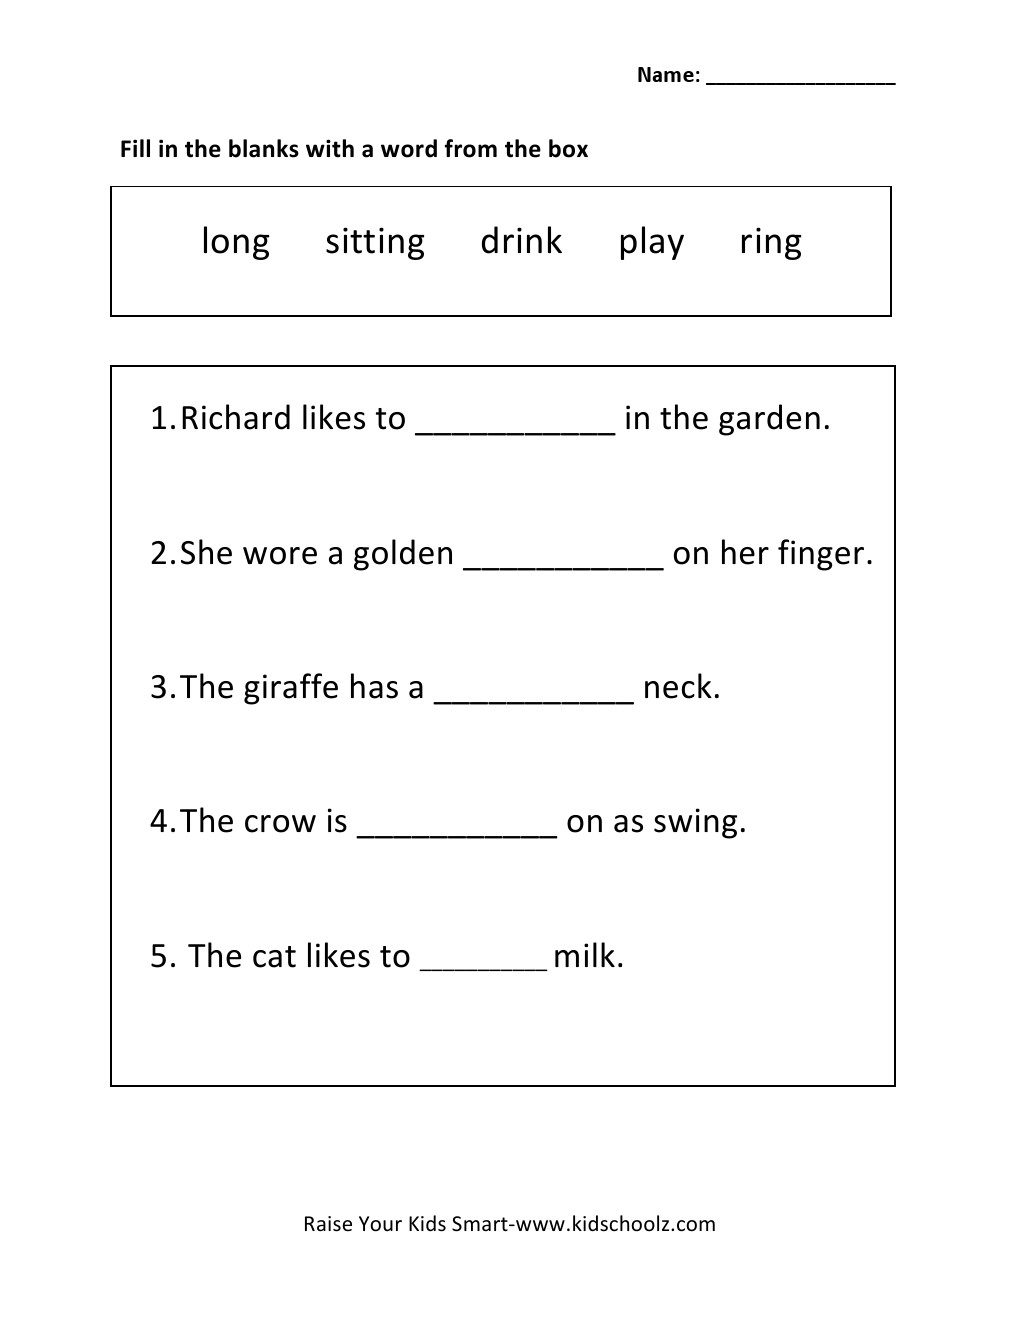 comma-splice-worksheet-with-answers-worksheet